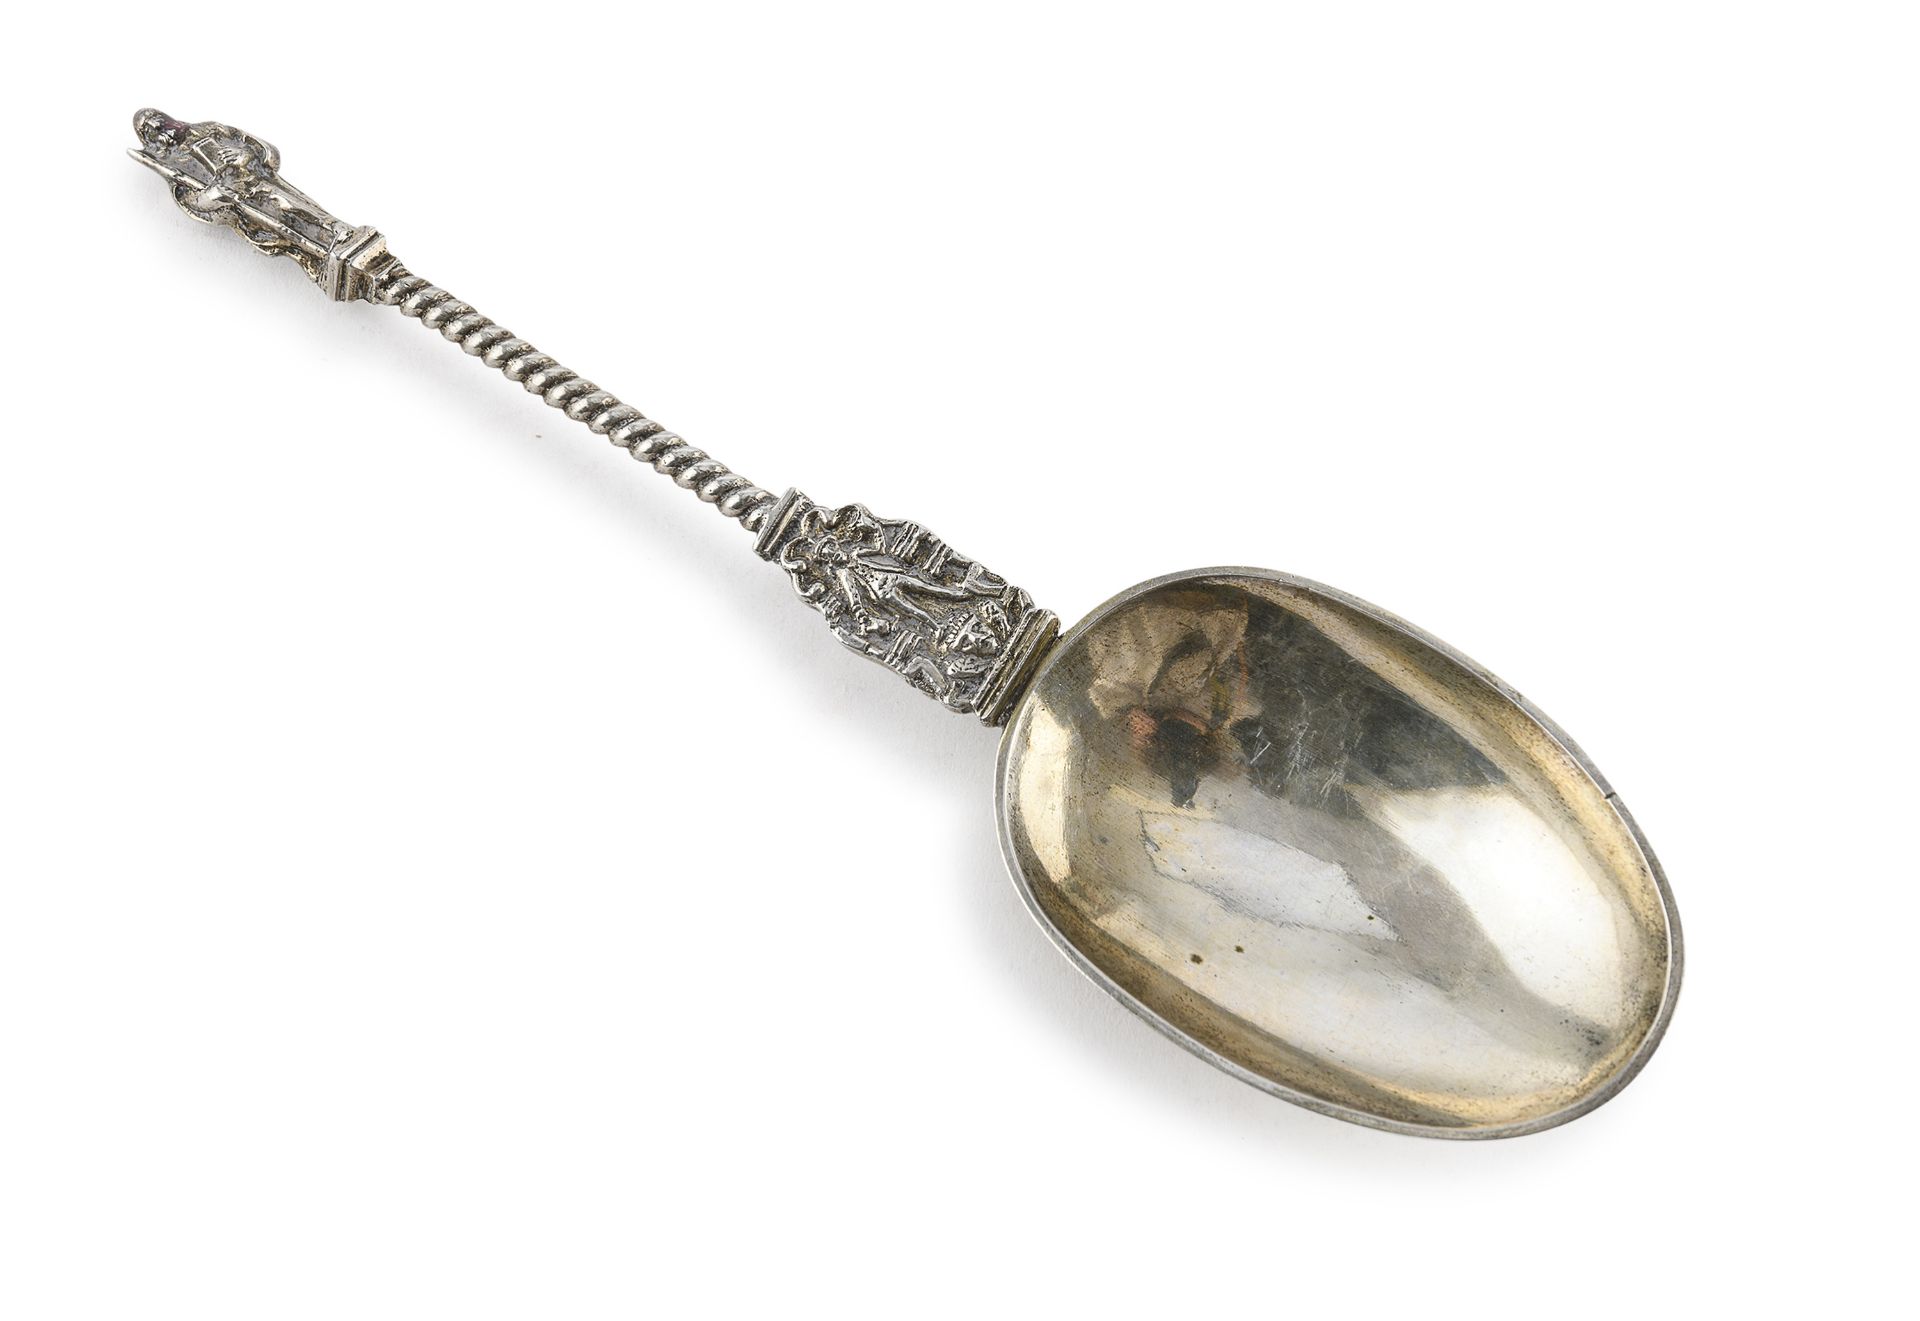 SILVER SPOON NETHERLANDS 19TH CENTURY